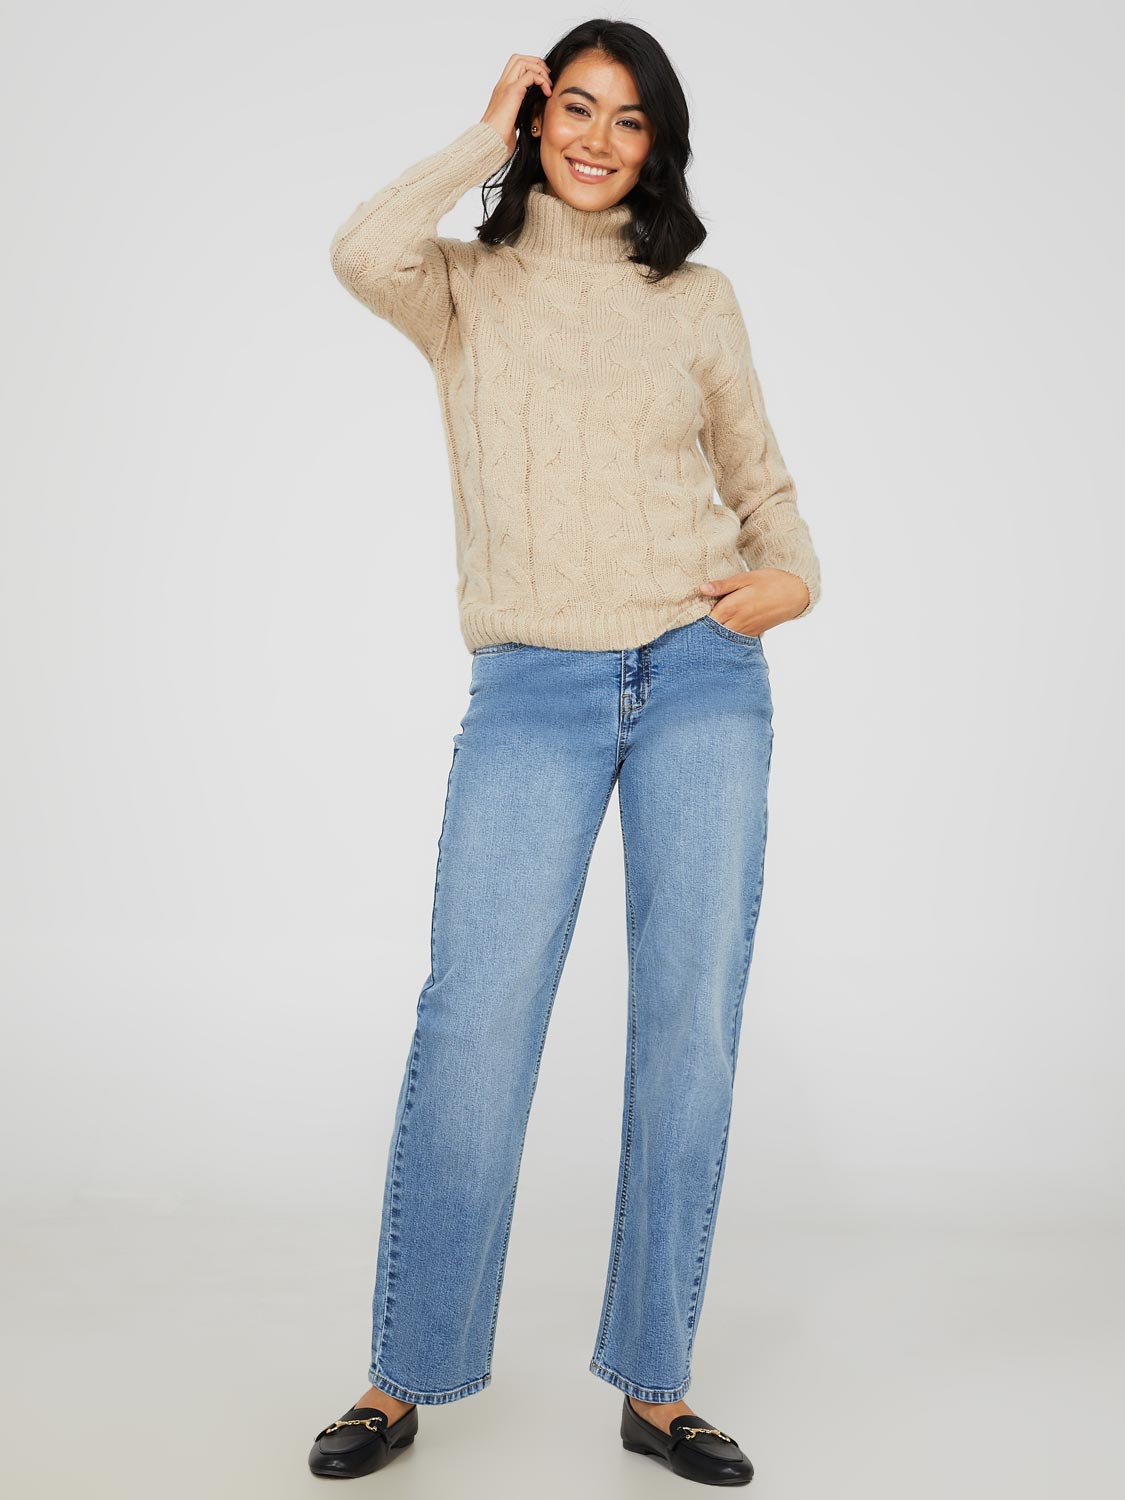 Low Rise Straight Leg Jean in Suzy Mid Wash